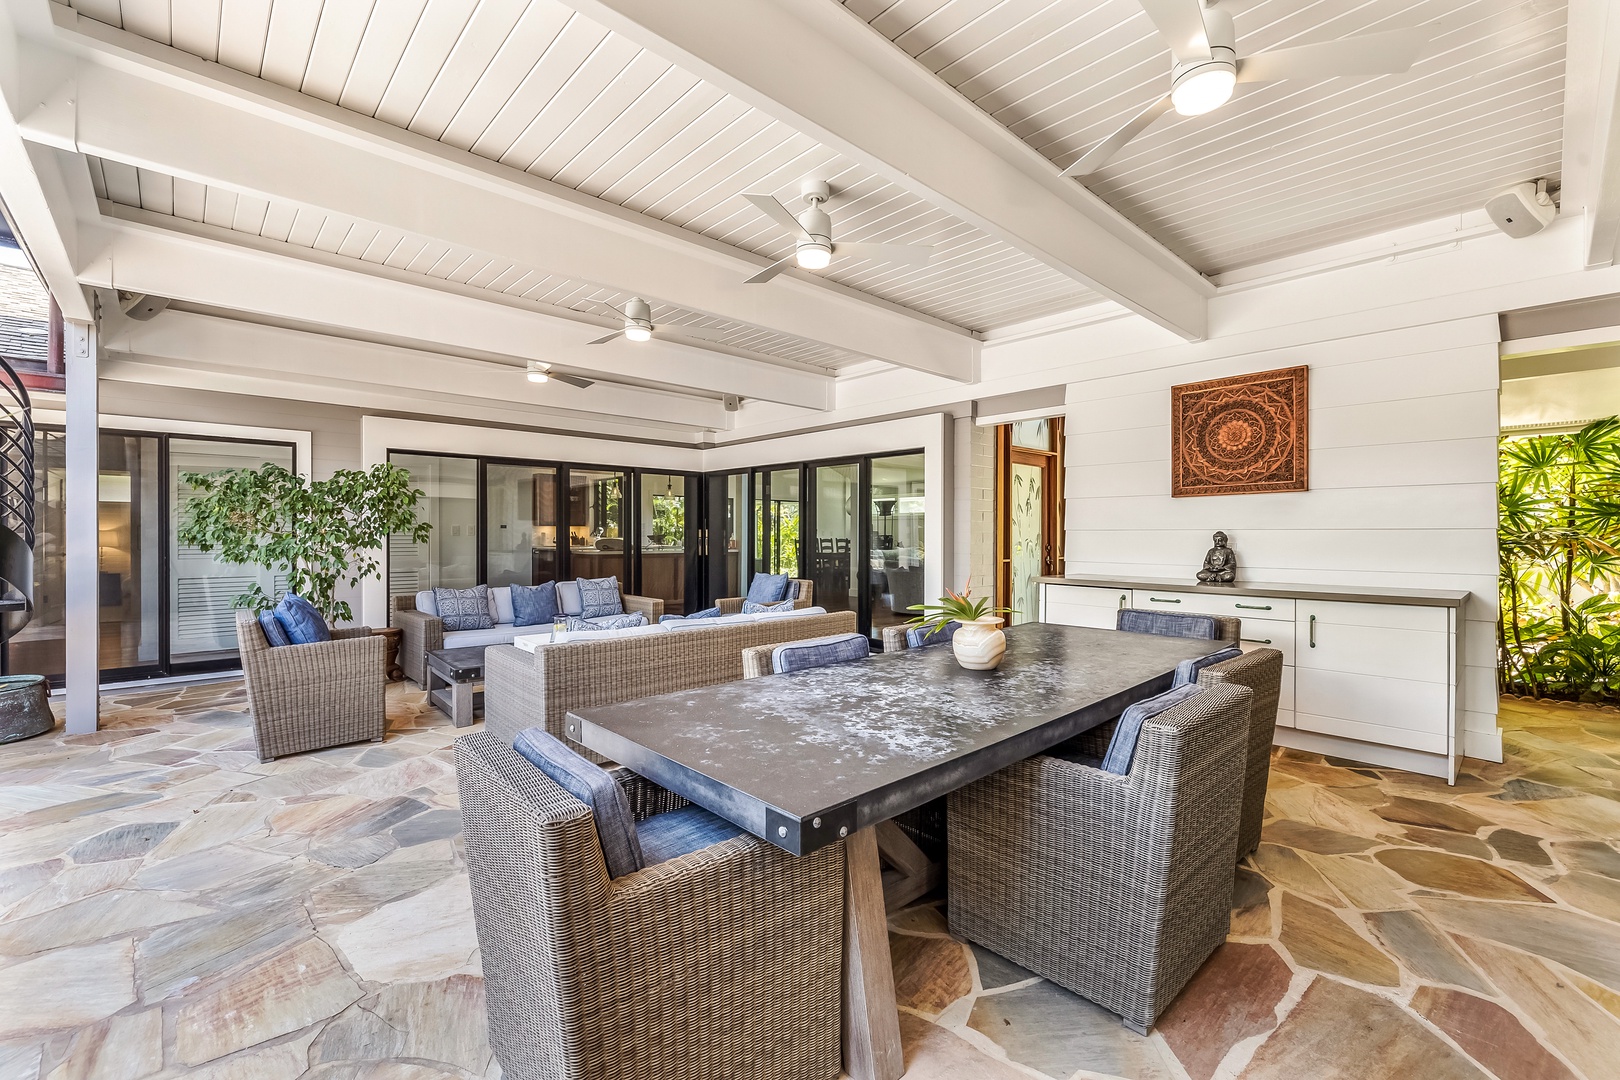 Kailua Vacation Rentals, Hale Ohana - The outdoor dining space comfortably seats 6